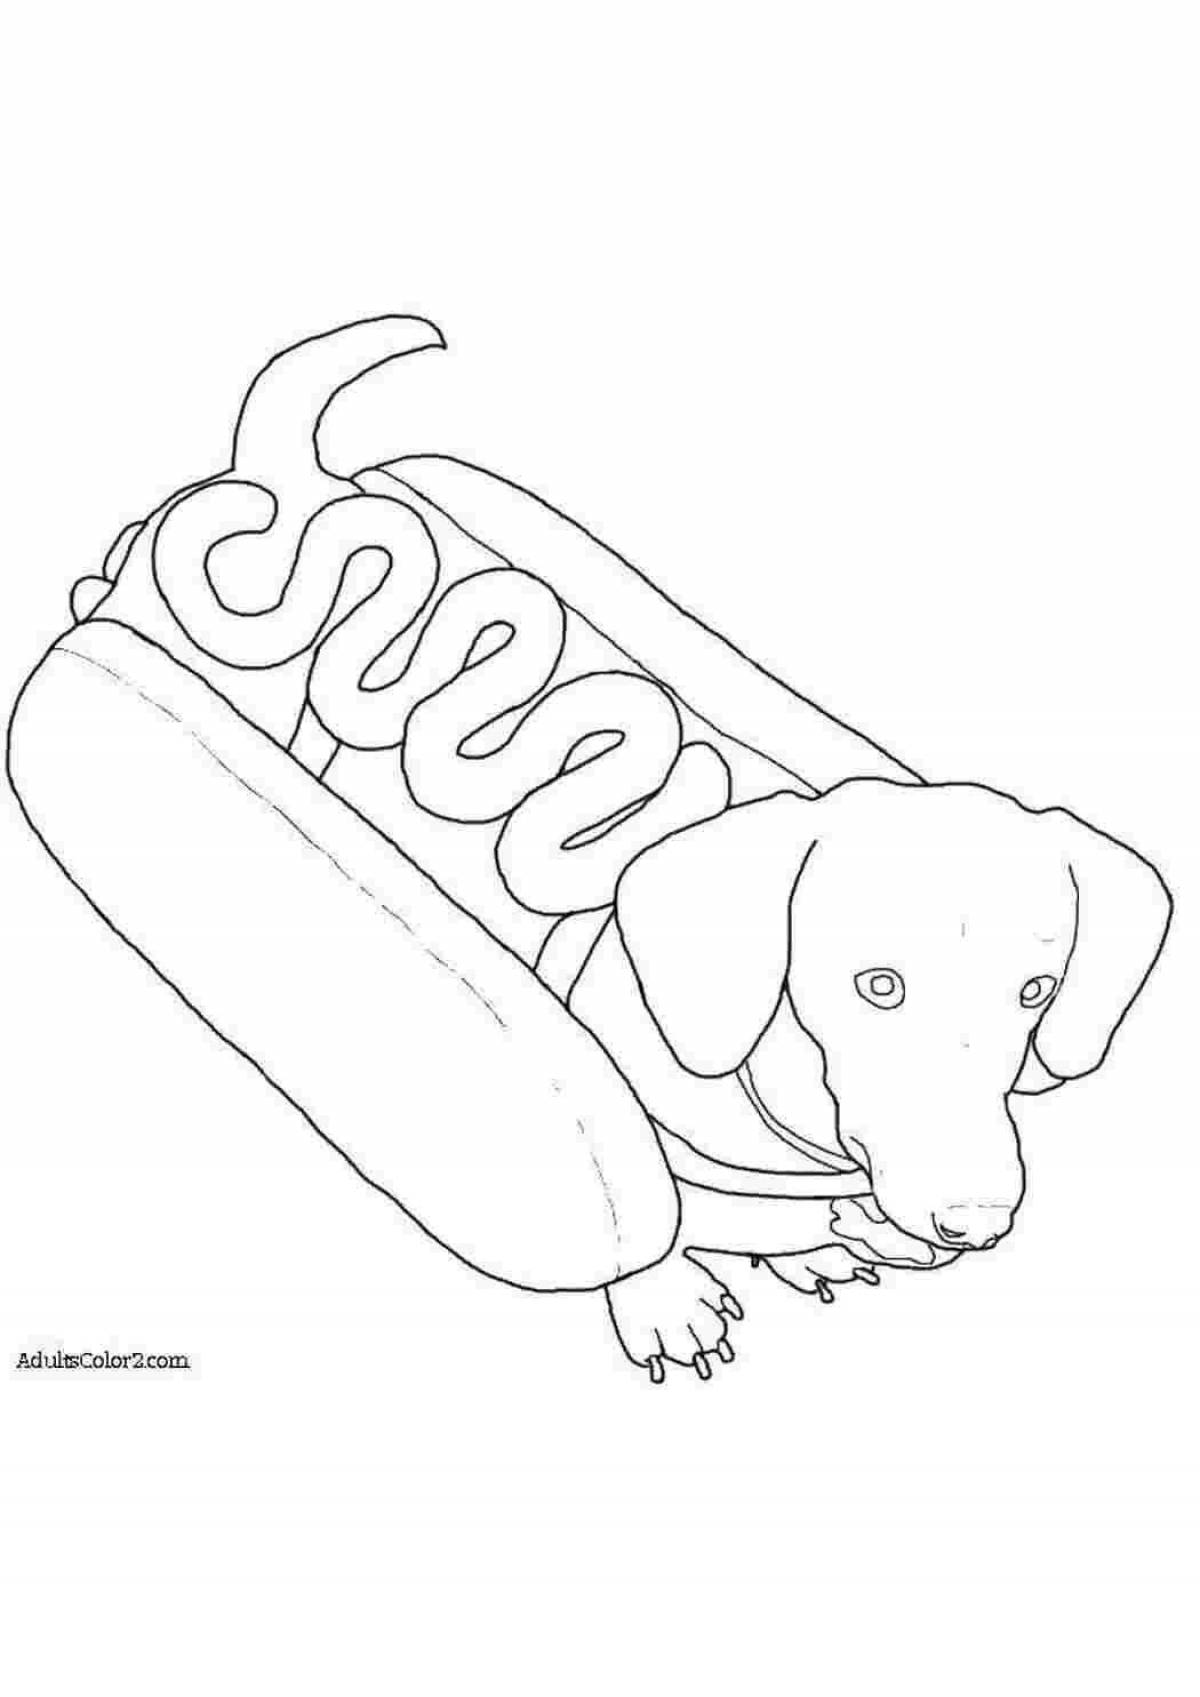 Coloring book excited dachshund